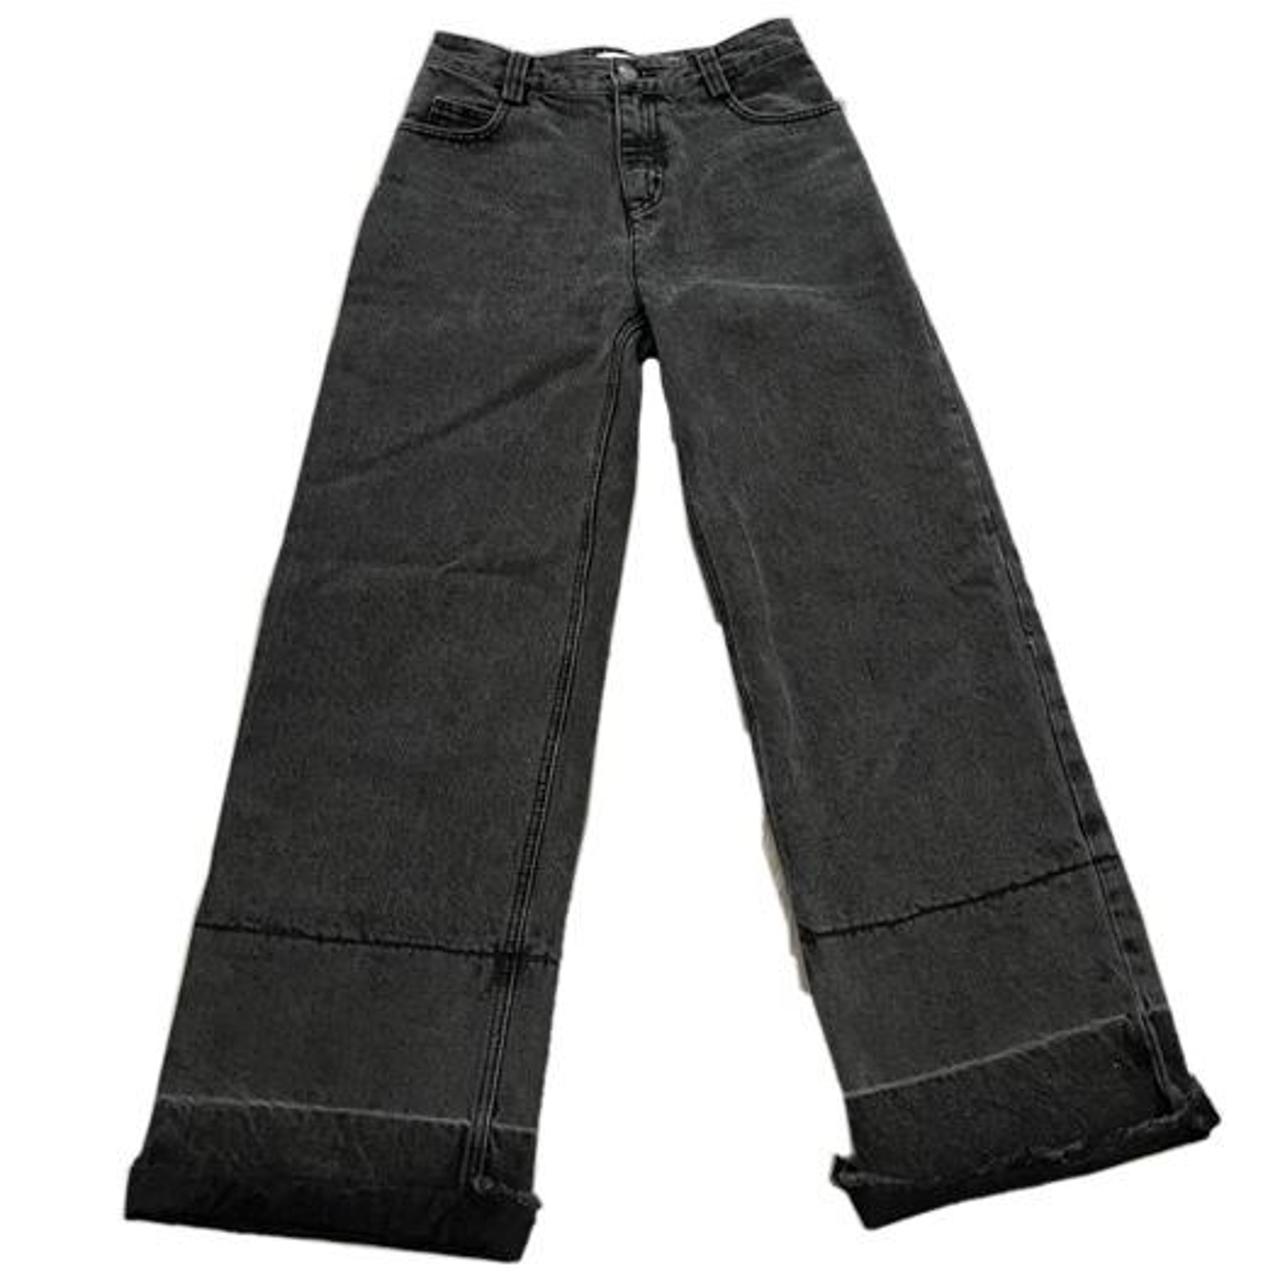 EVIDNT Women's Black and Grey Jeans